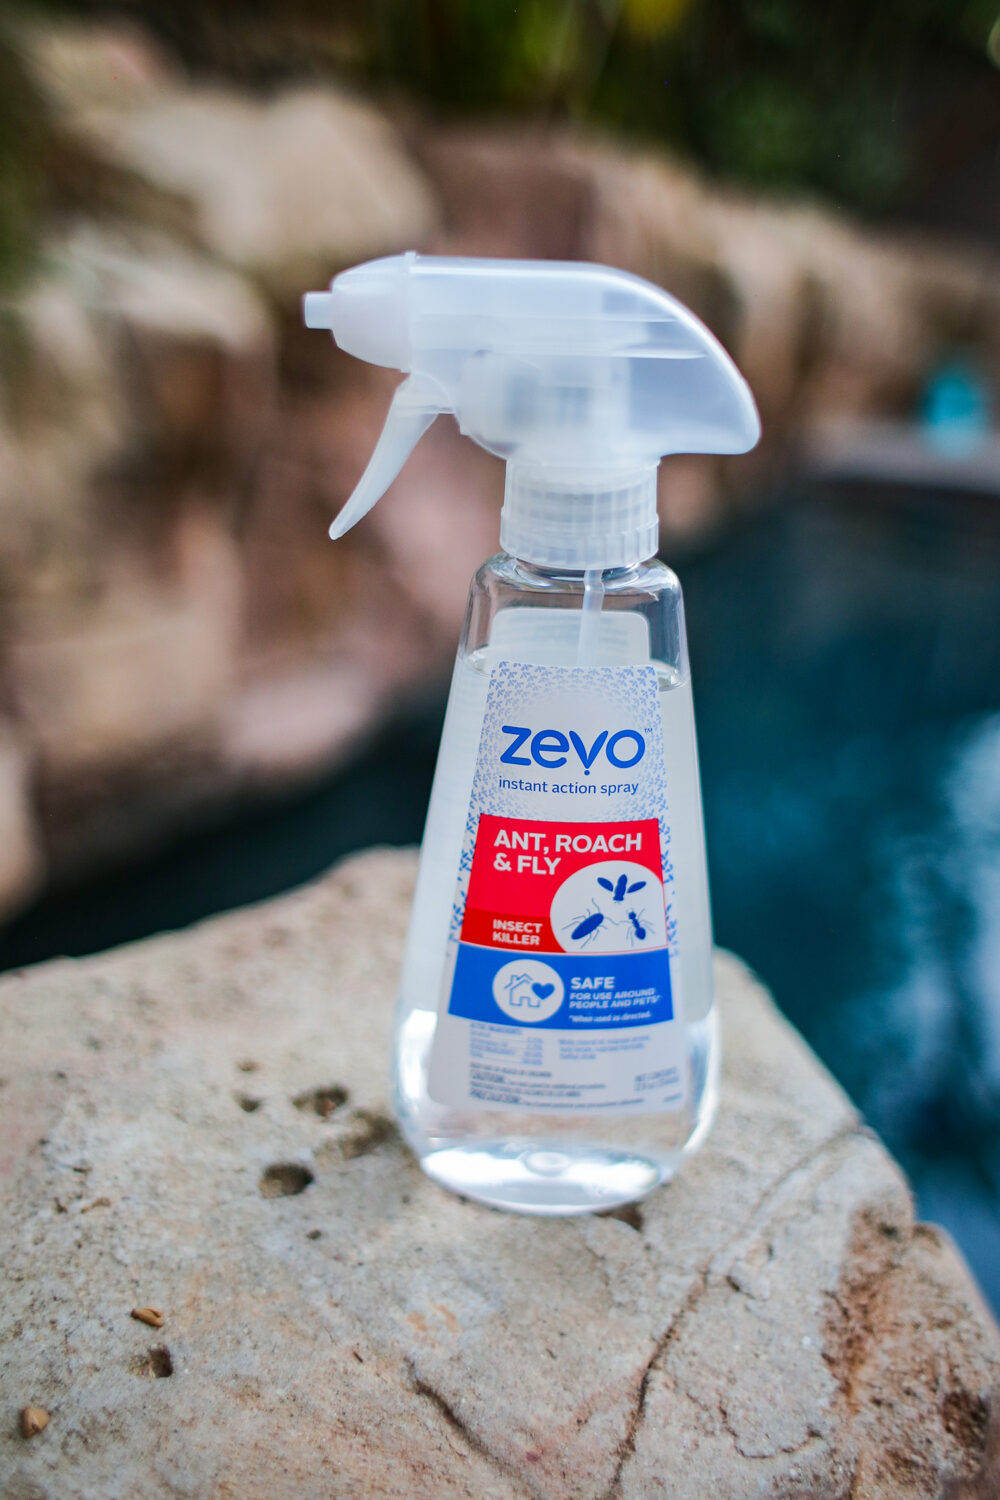 ZEVO Products: key steps to a healthier home